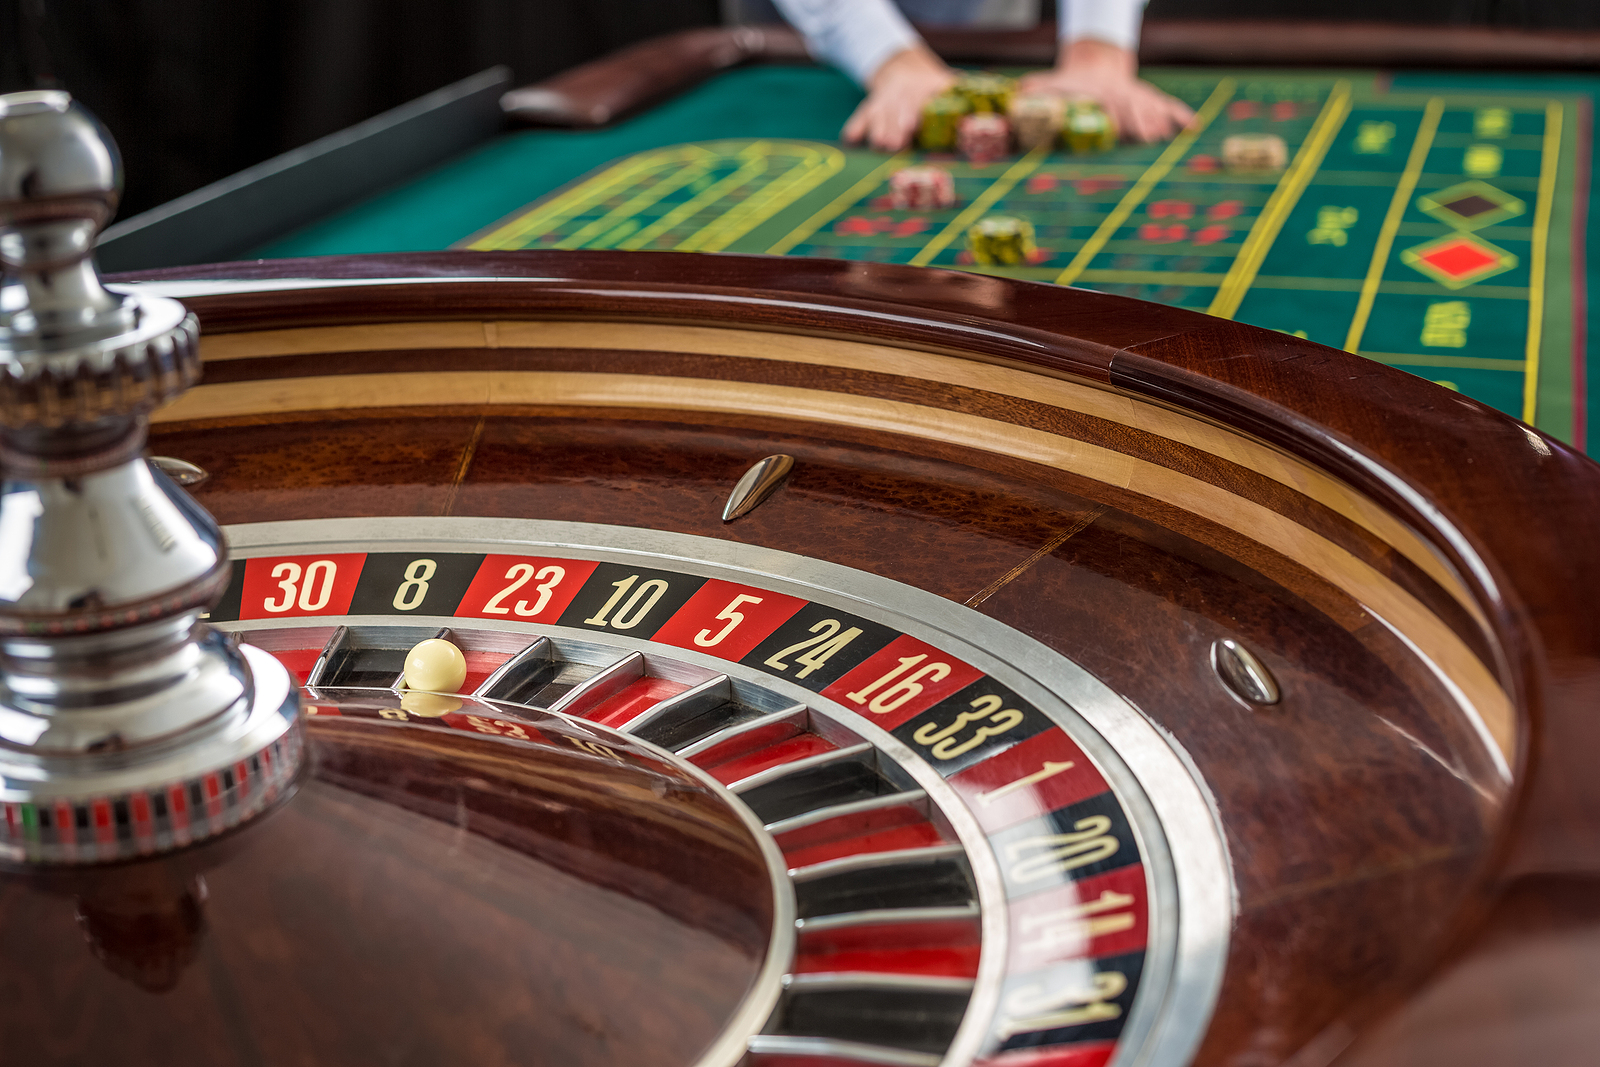  Understand gamble tax with Gurian CPA Firm in Houston, Texas